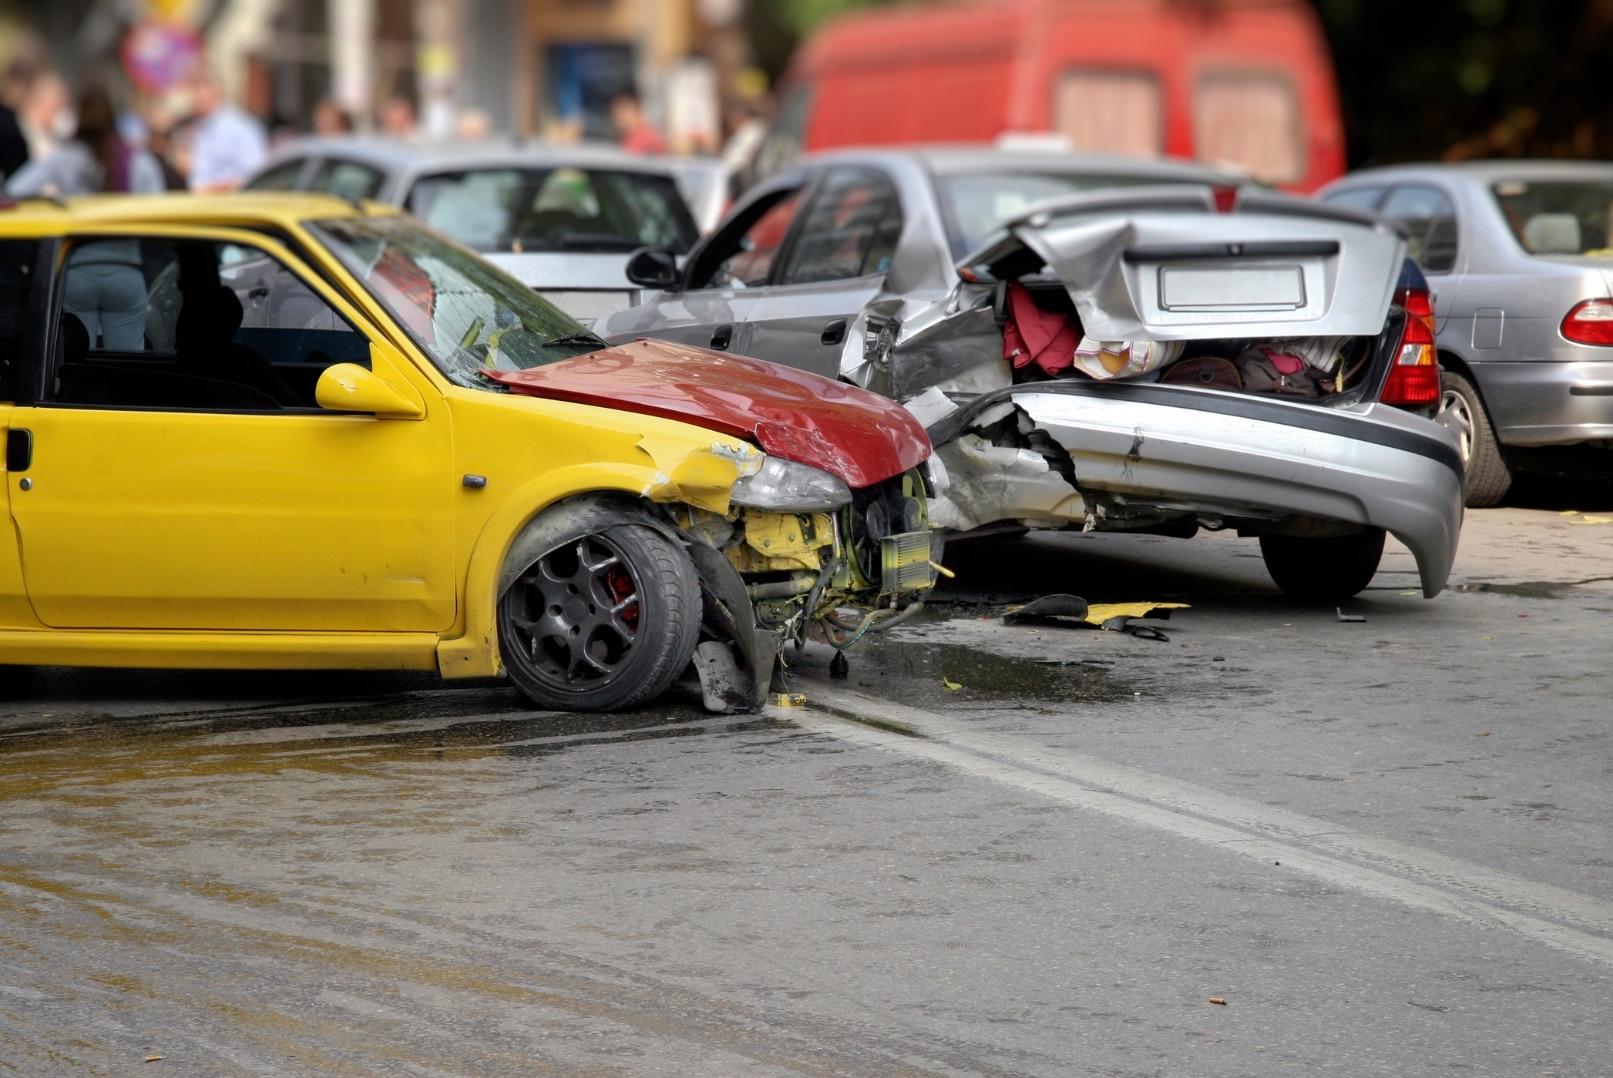 Finding An Evans Car Accident Lawyer